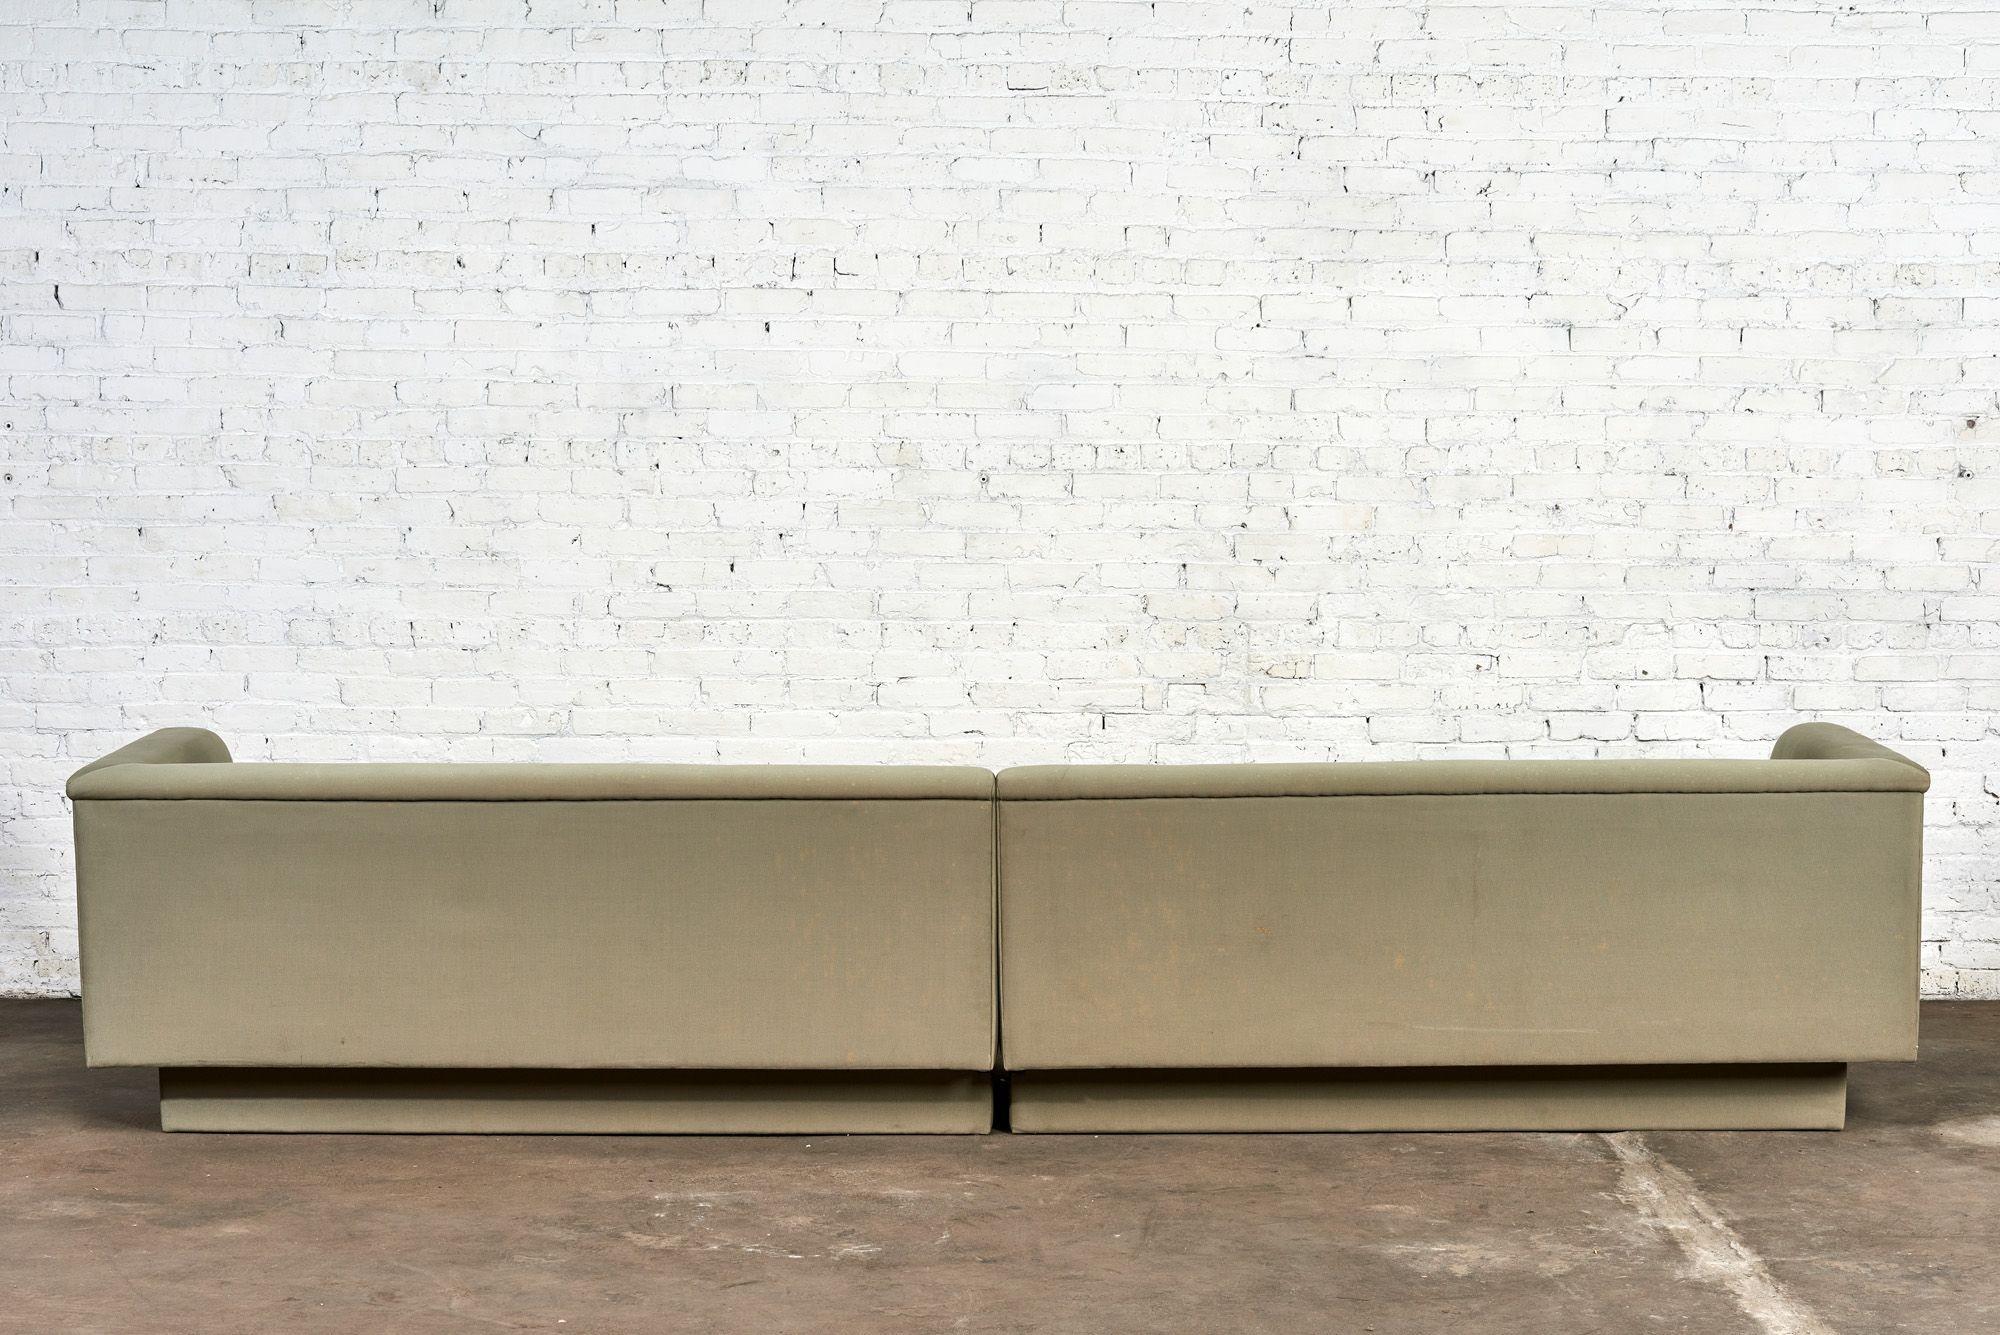 Late 20th Century Post Modern Sofa with Plinth Base, 1980